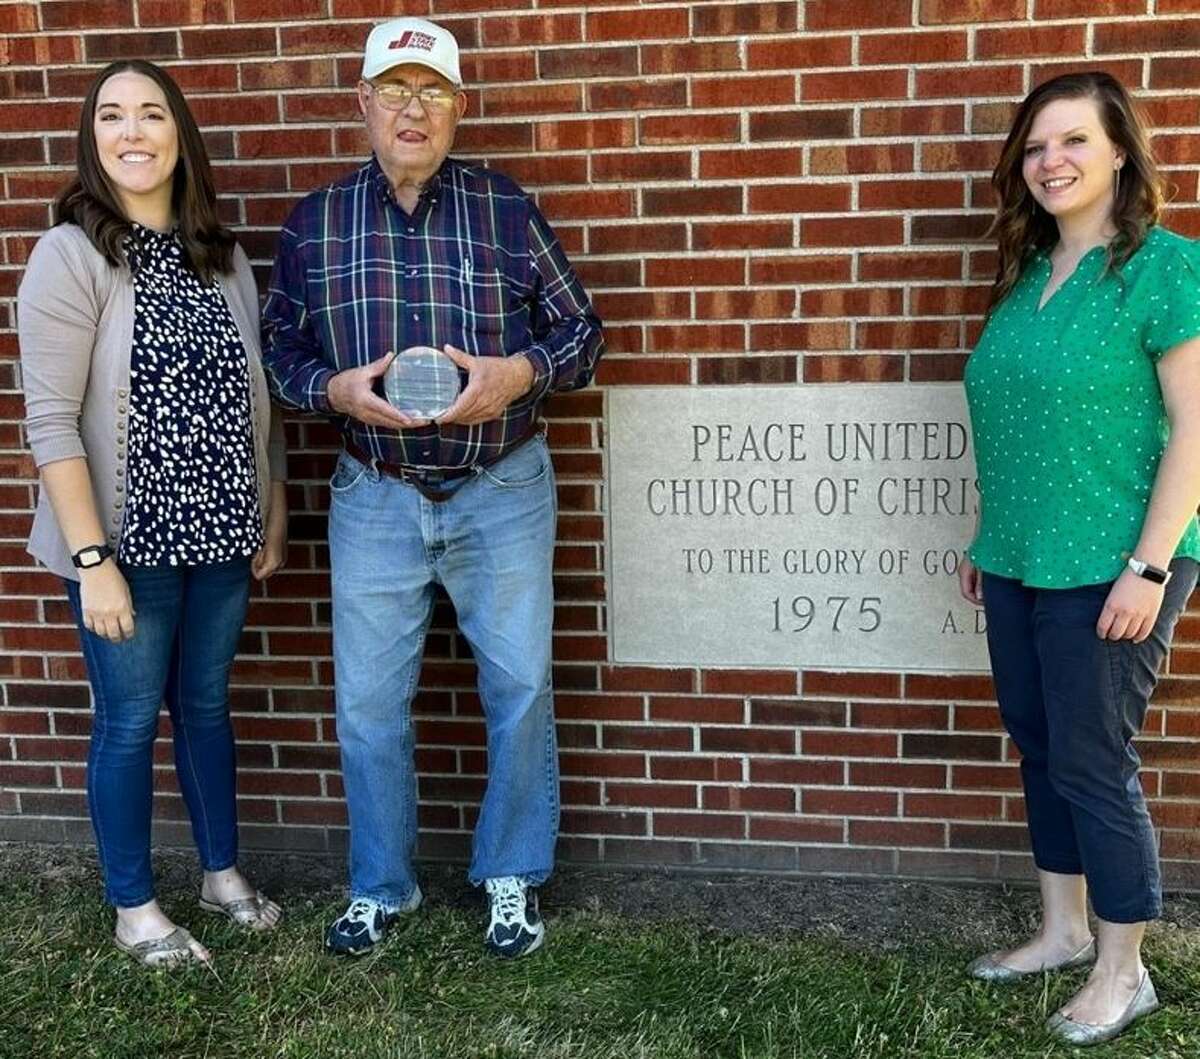 Jessica Jaffry, left, Jersey County 4-H youth development program coordinator, and Lisa Peterson, right, acting county director, present Jim Siebert, a Peace United Church of Christ member, with the 2022 Community Partner Award.